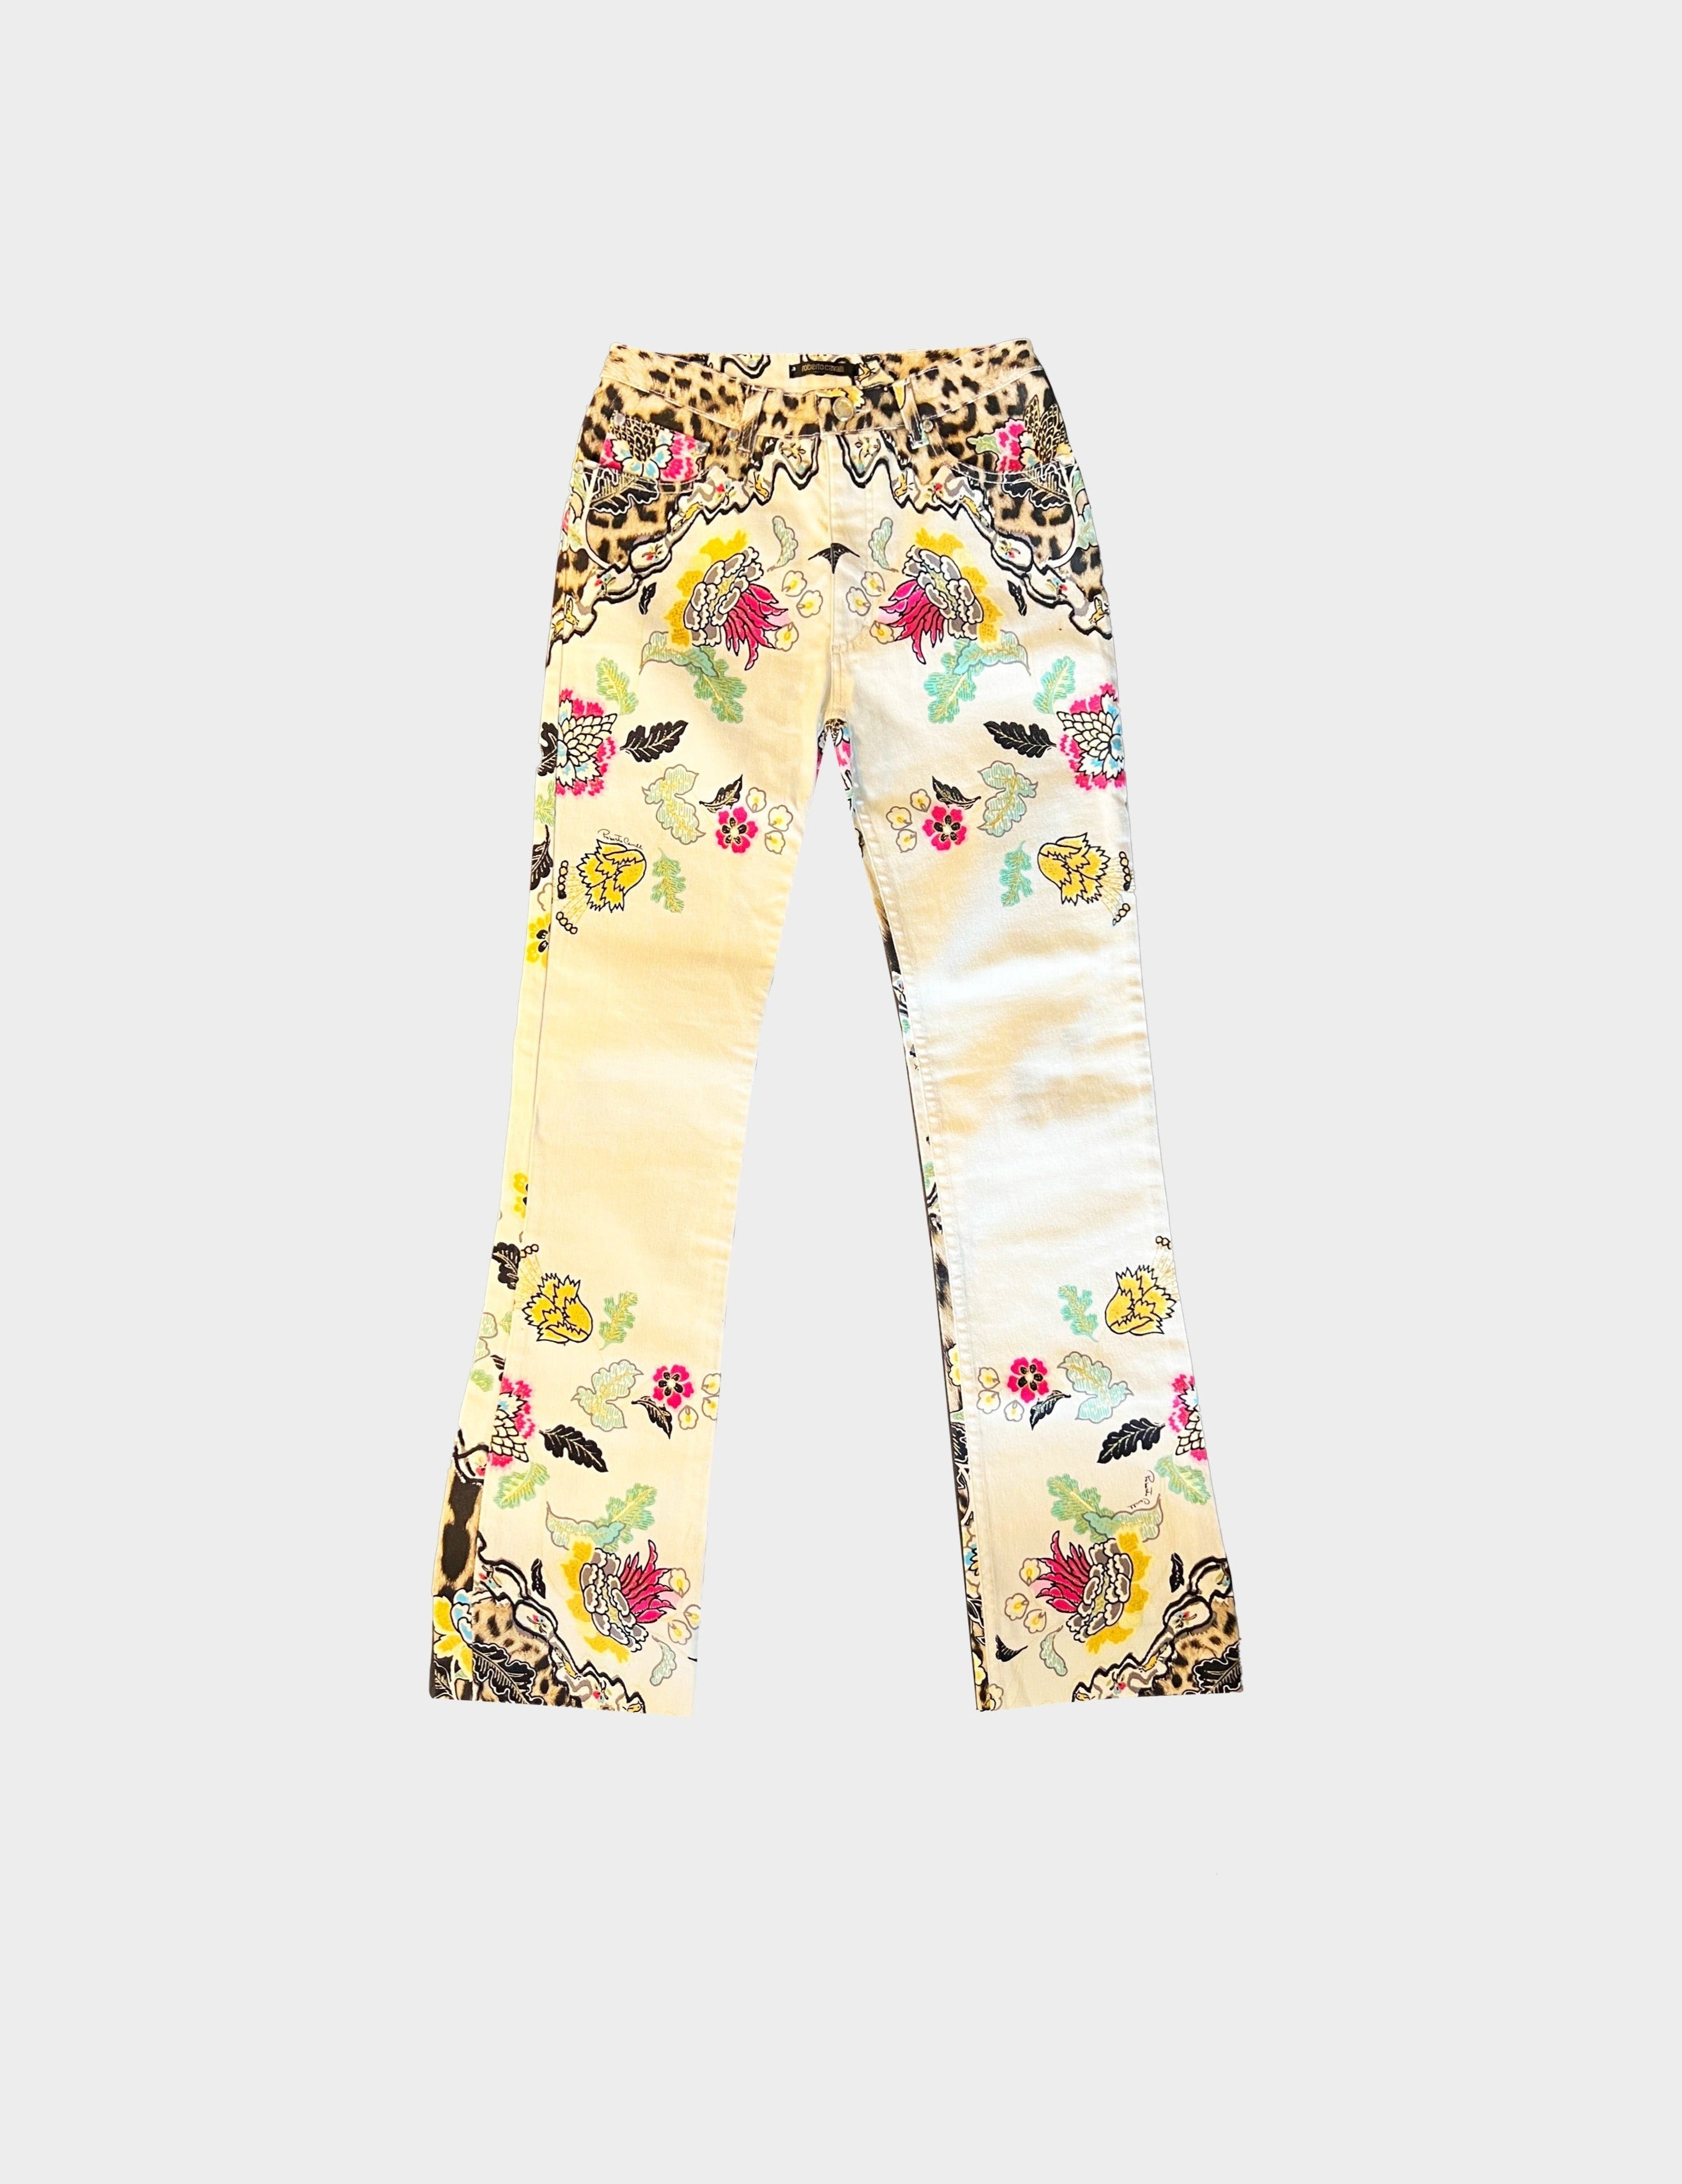 Roberto Cavalli Spring Summer 2003 Floral Chinoiserie Jeans